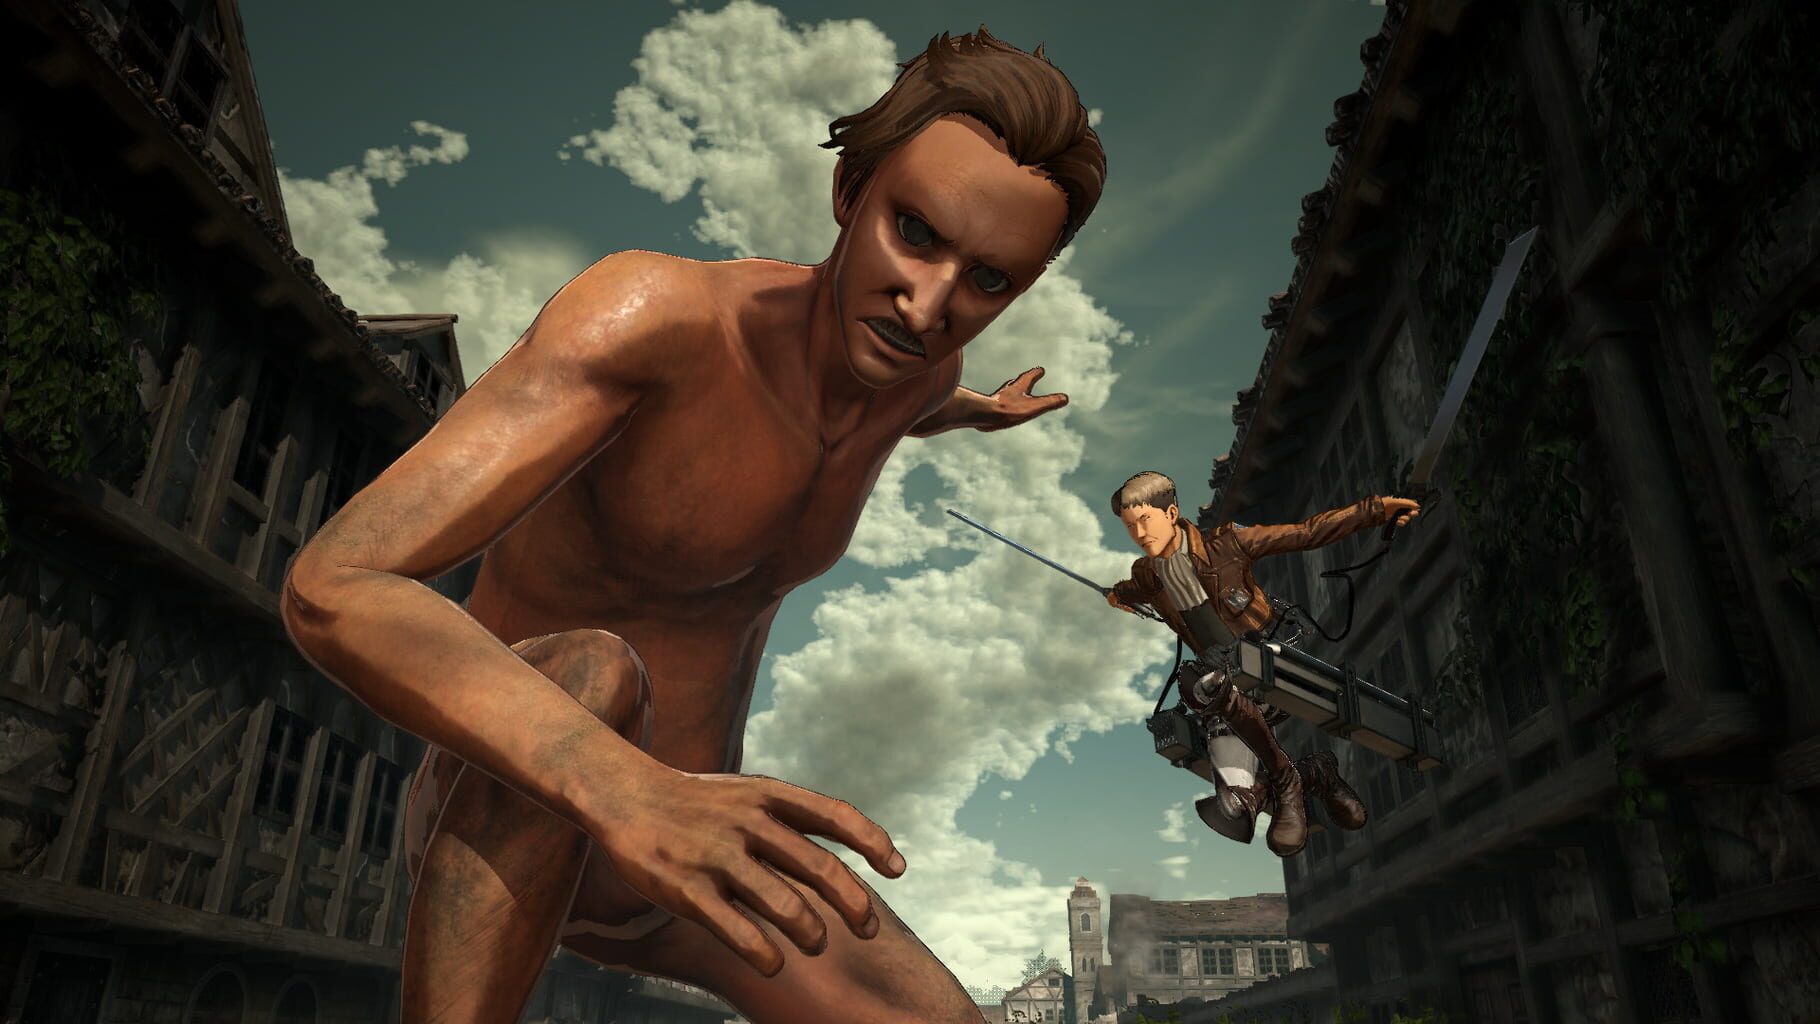 Attack on Titan 2: Proof of Expertise screenshot